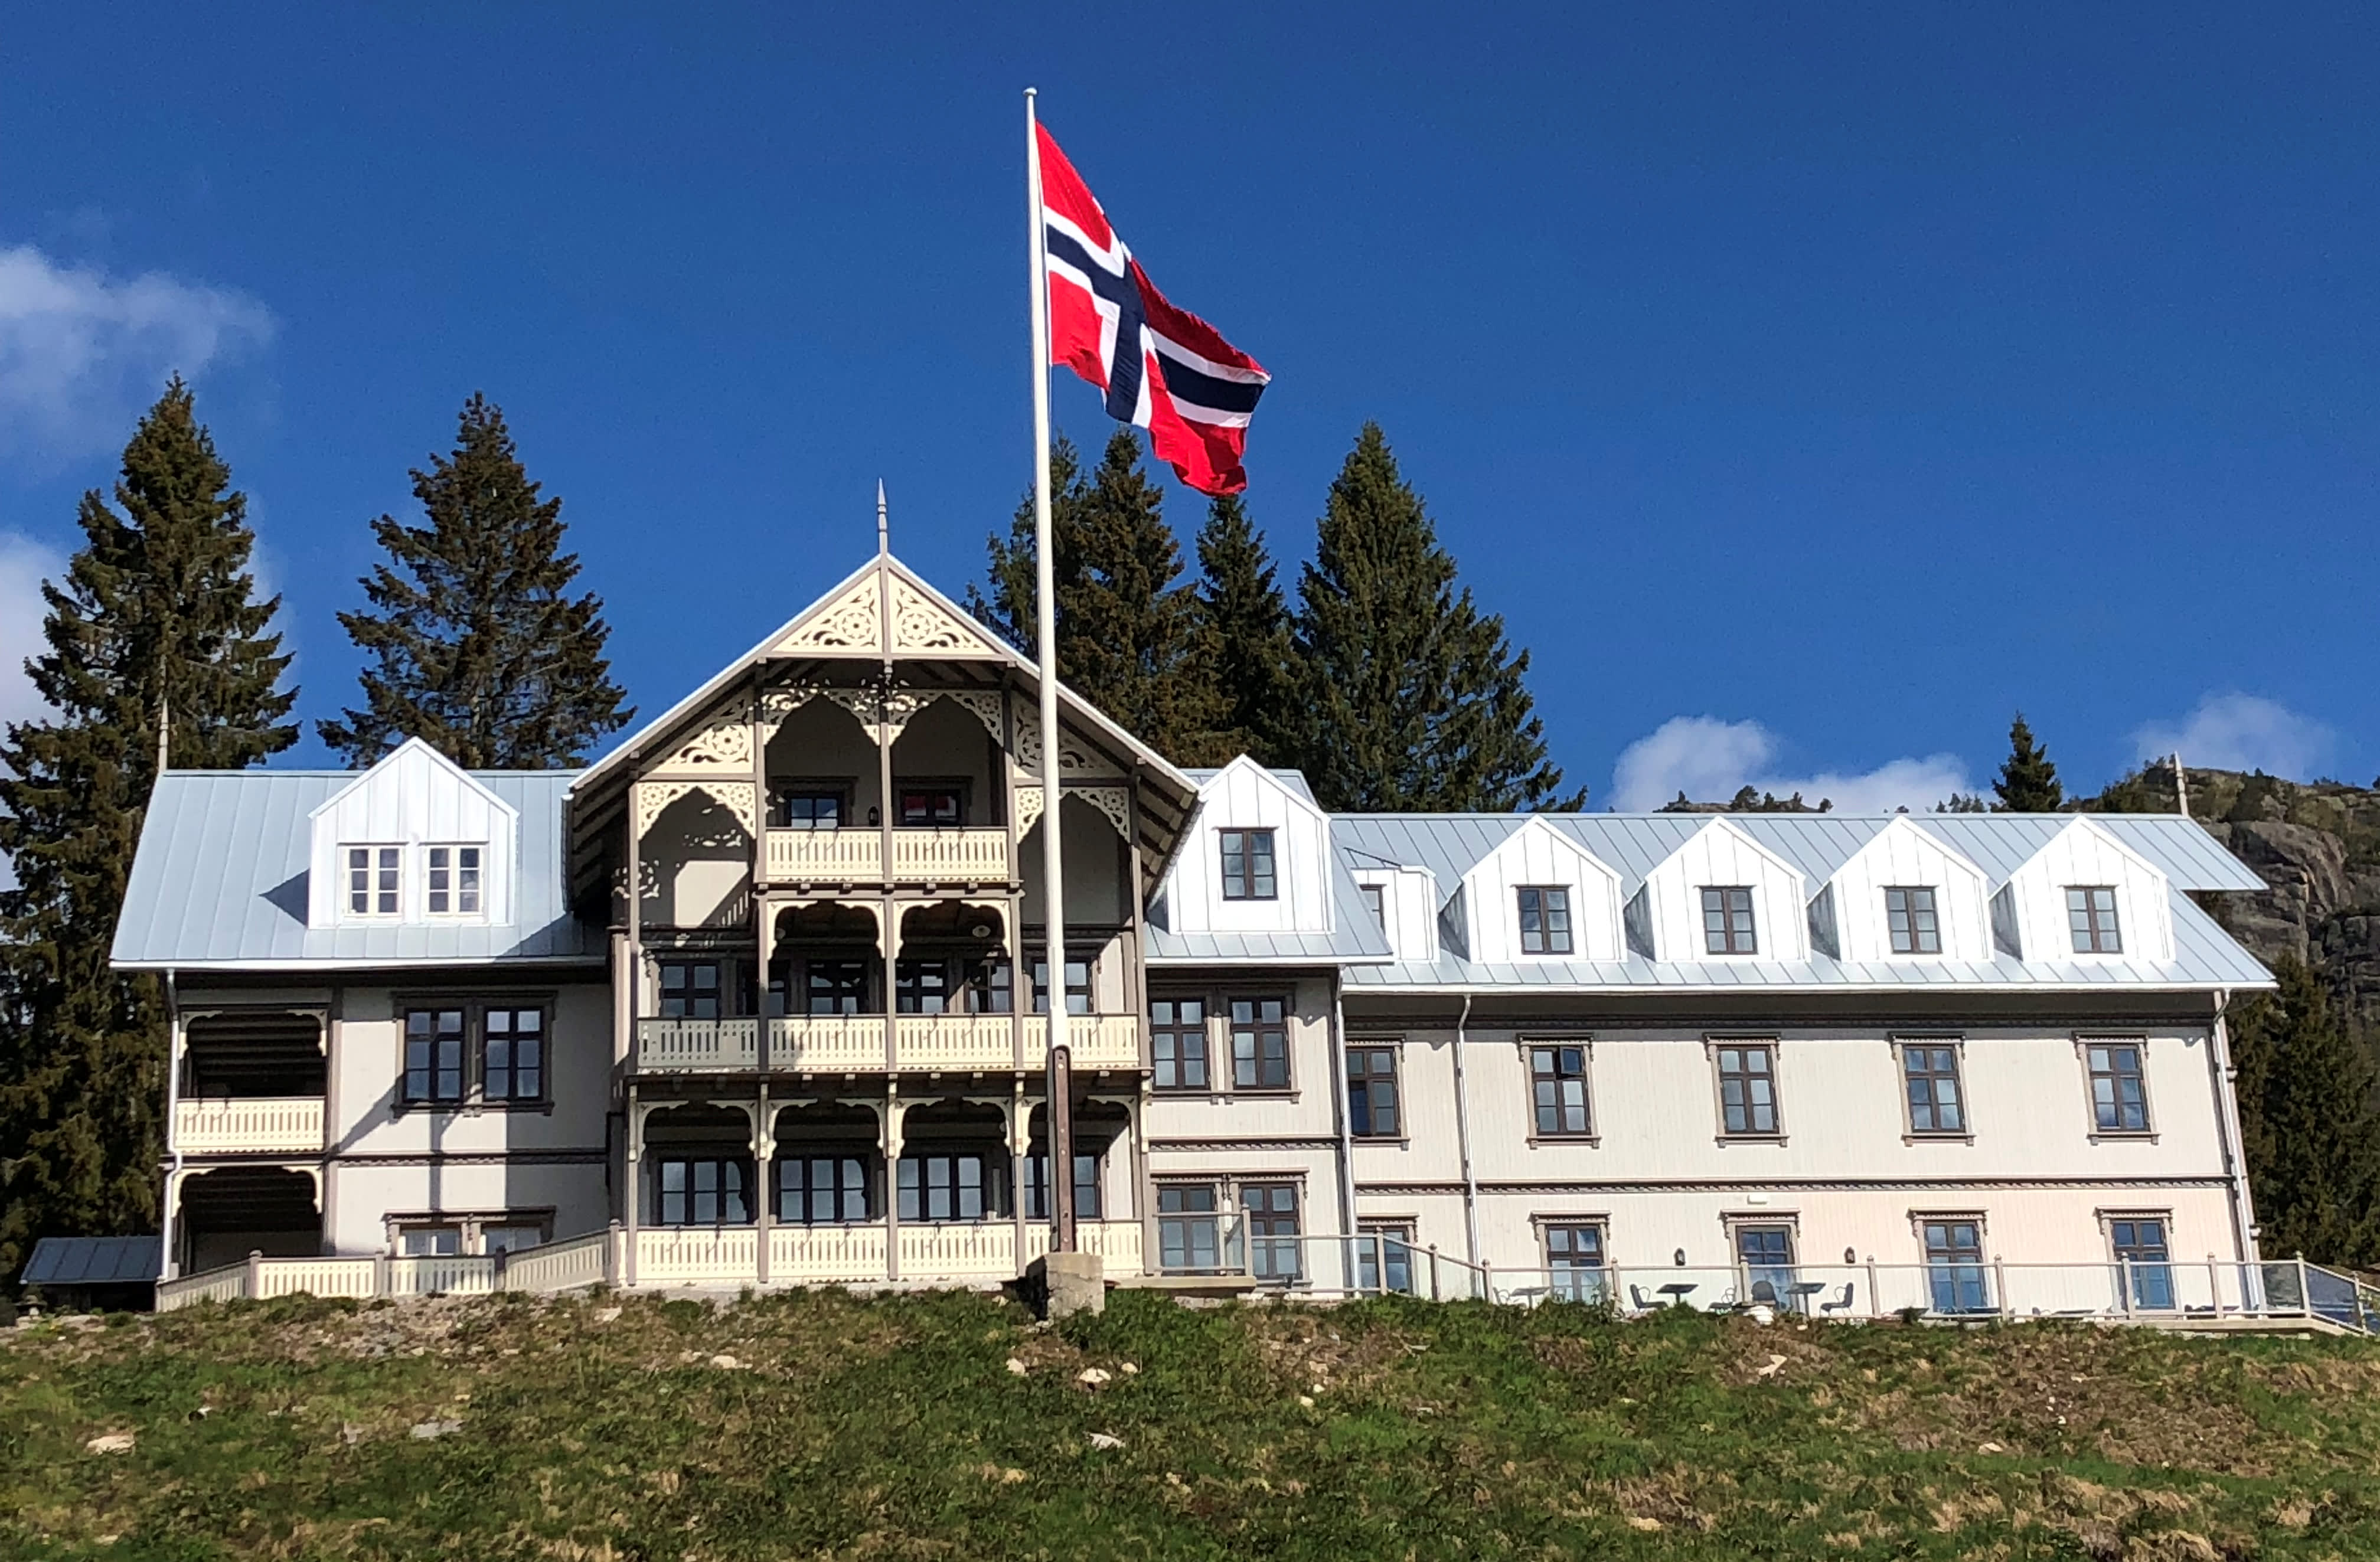 Hotel in an old building style and a flagpole with the Norwegian flag. Photo